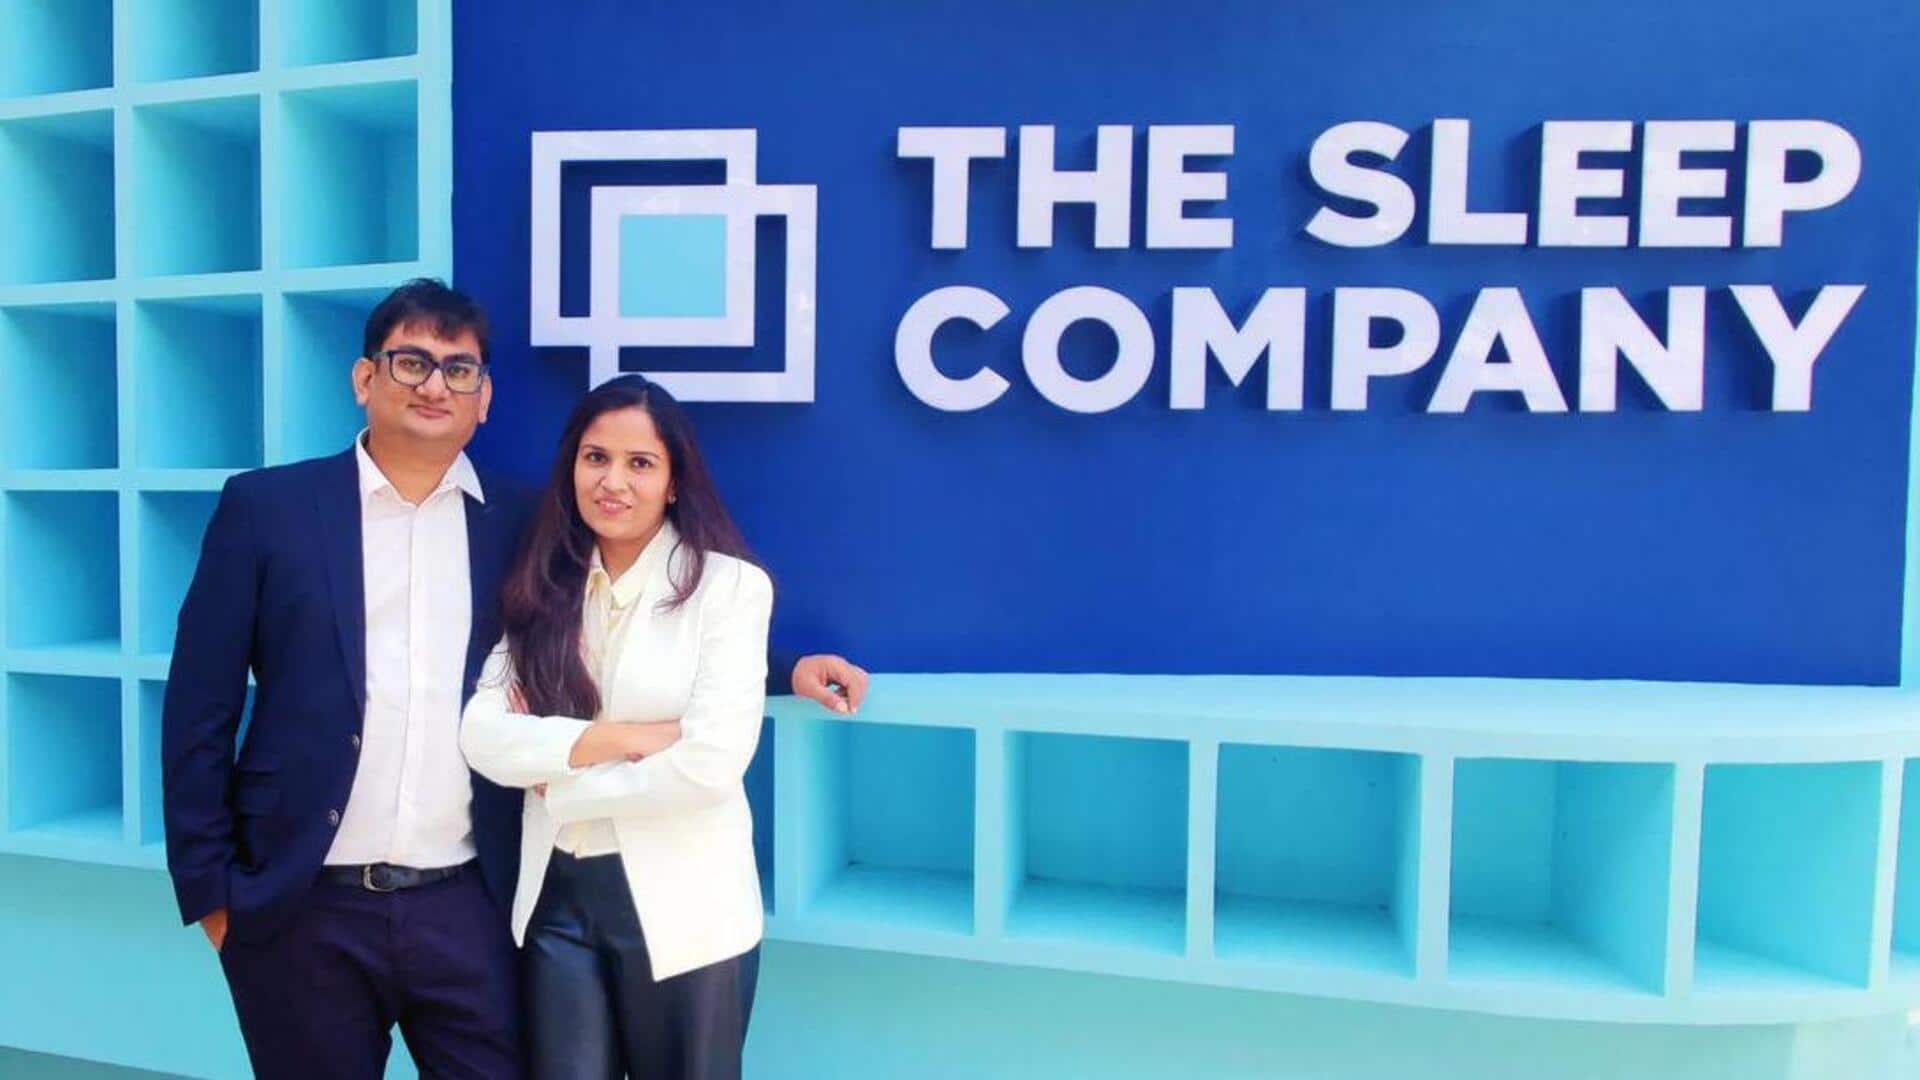 Sleep Company raises Rs. 184cr; doubles valuation in one year